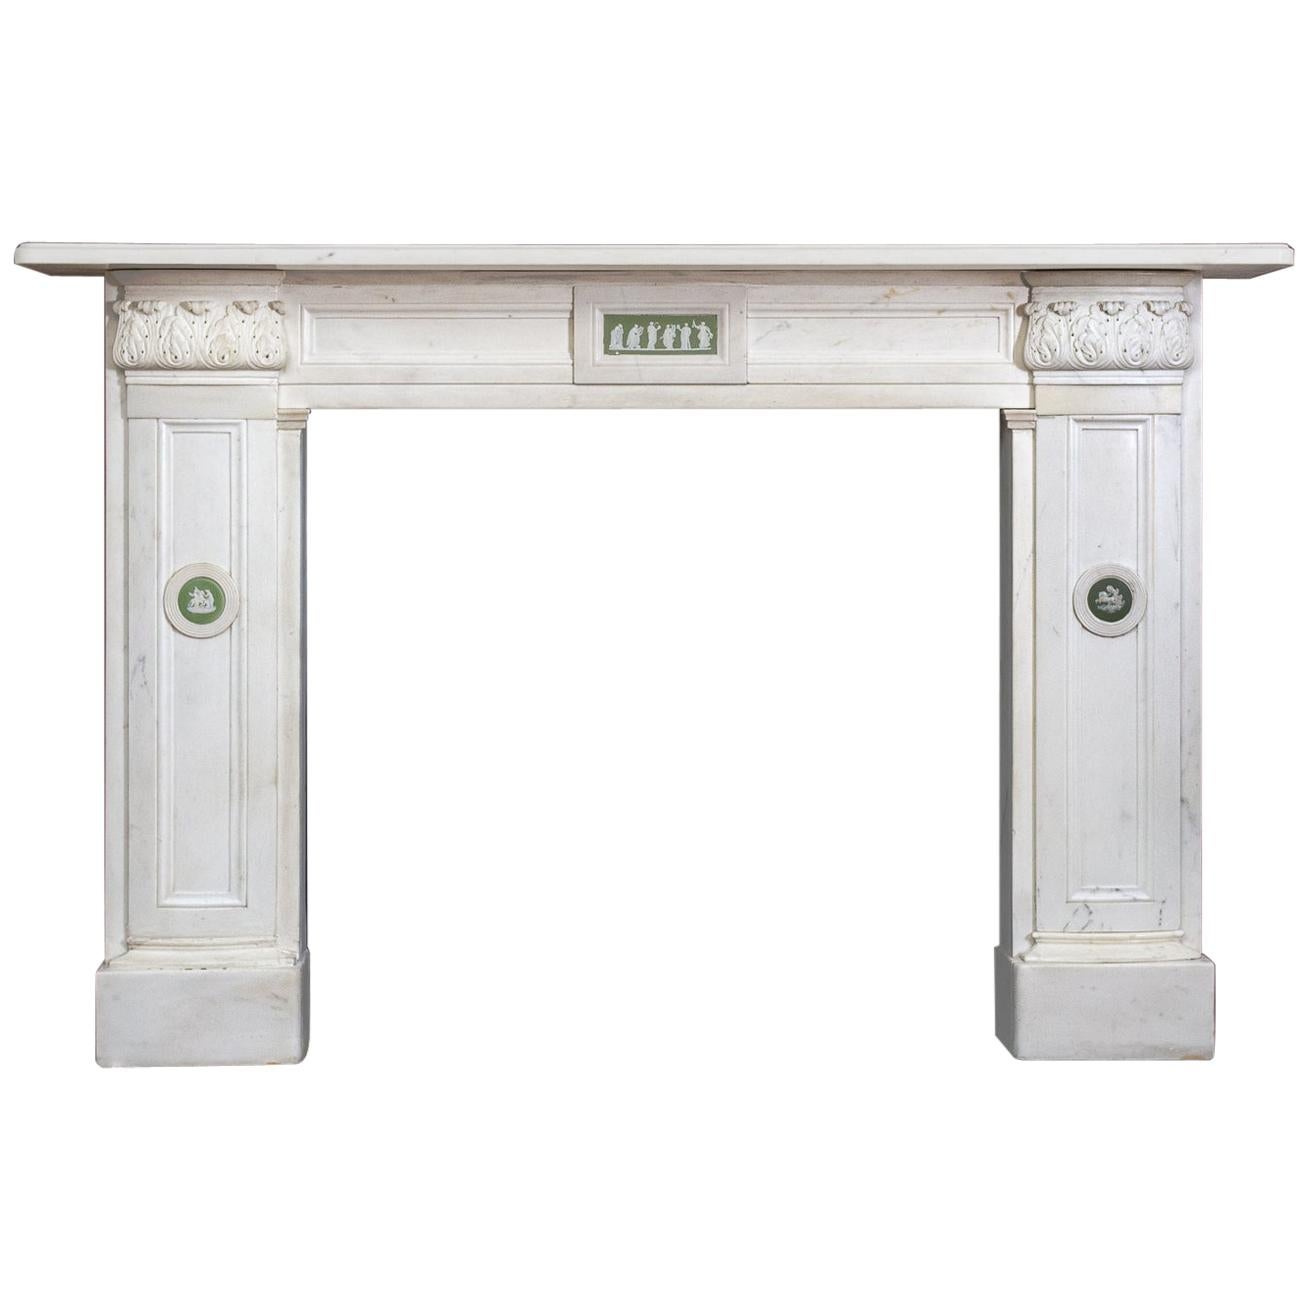 Regency Statuary Marble Fireplace with Wedgewood Plaques